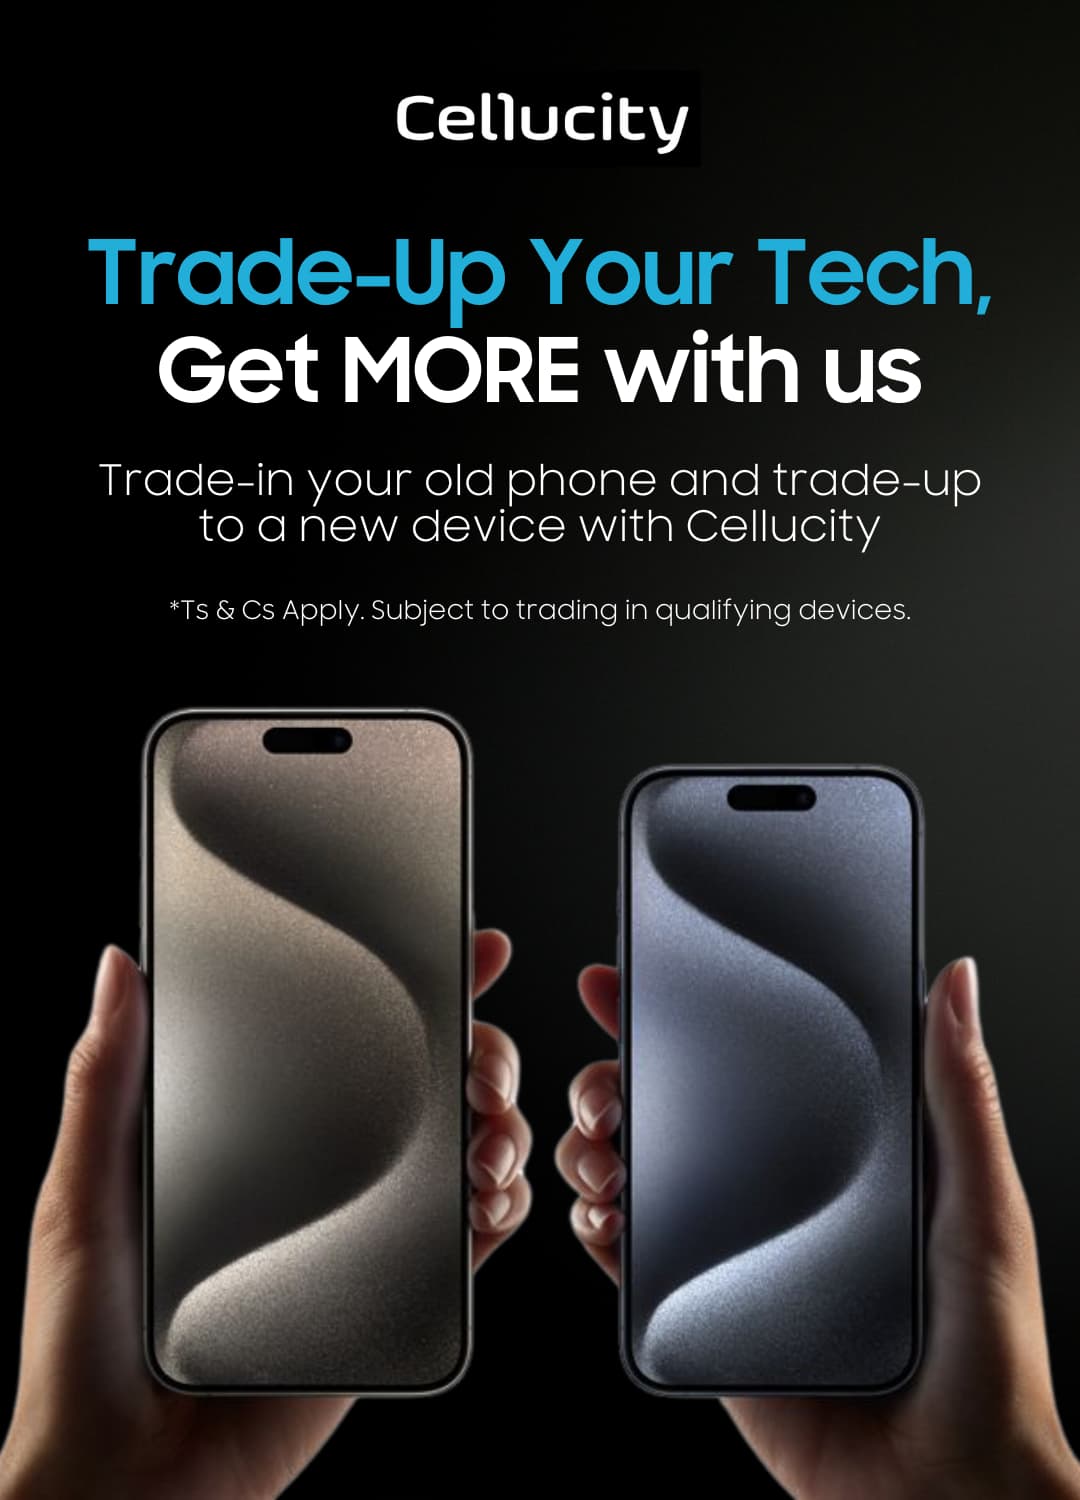 Trade-In Your Tech and get more with us